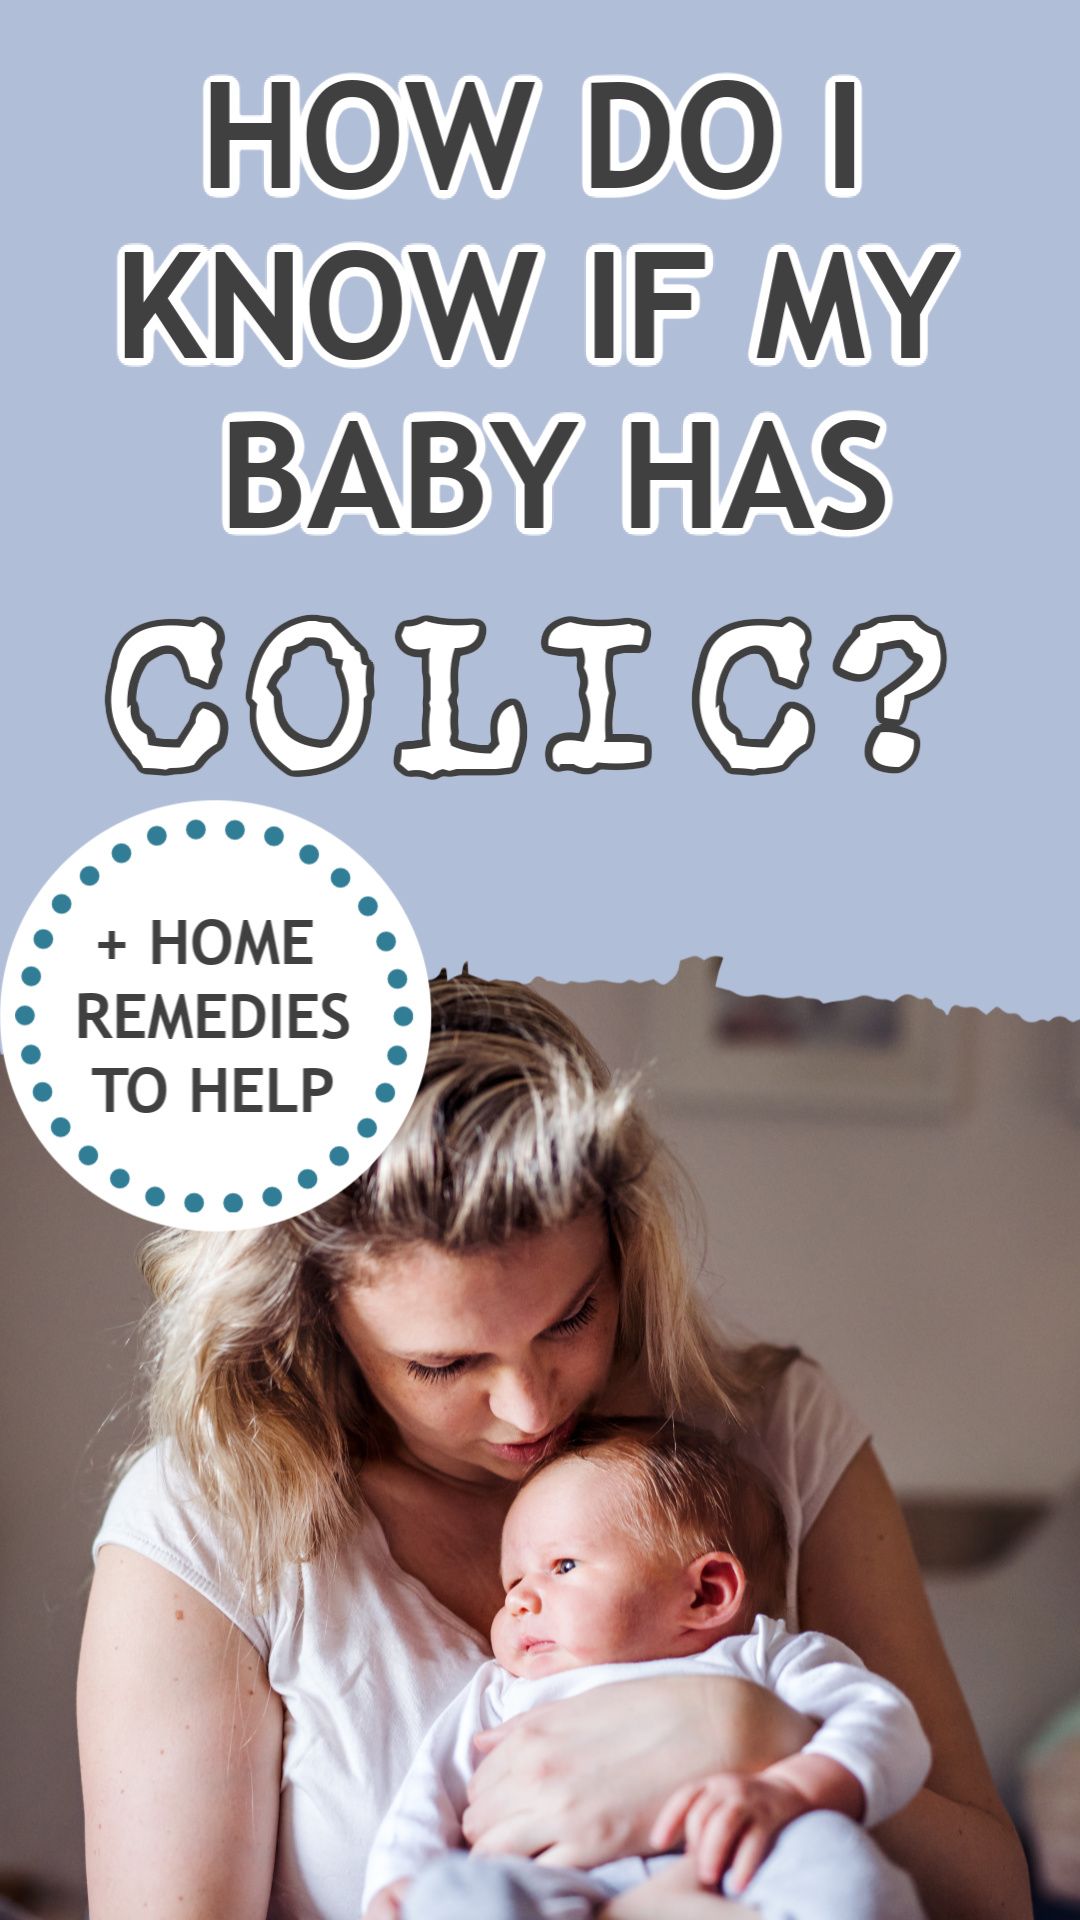 How Do I Know If My Baby Has Colic?